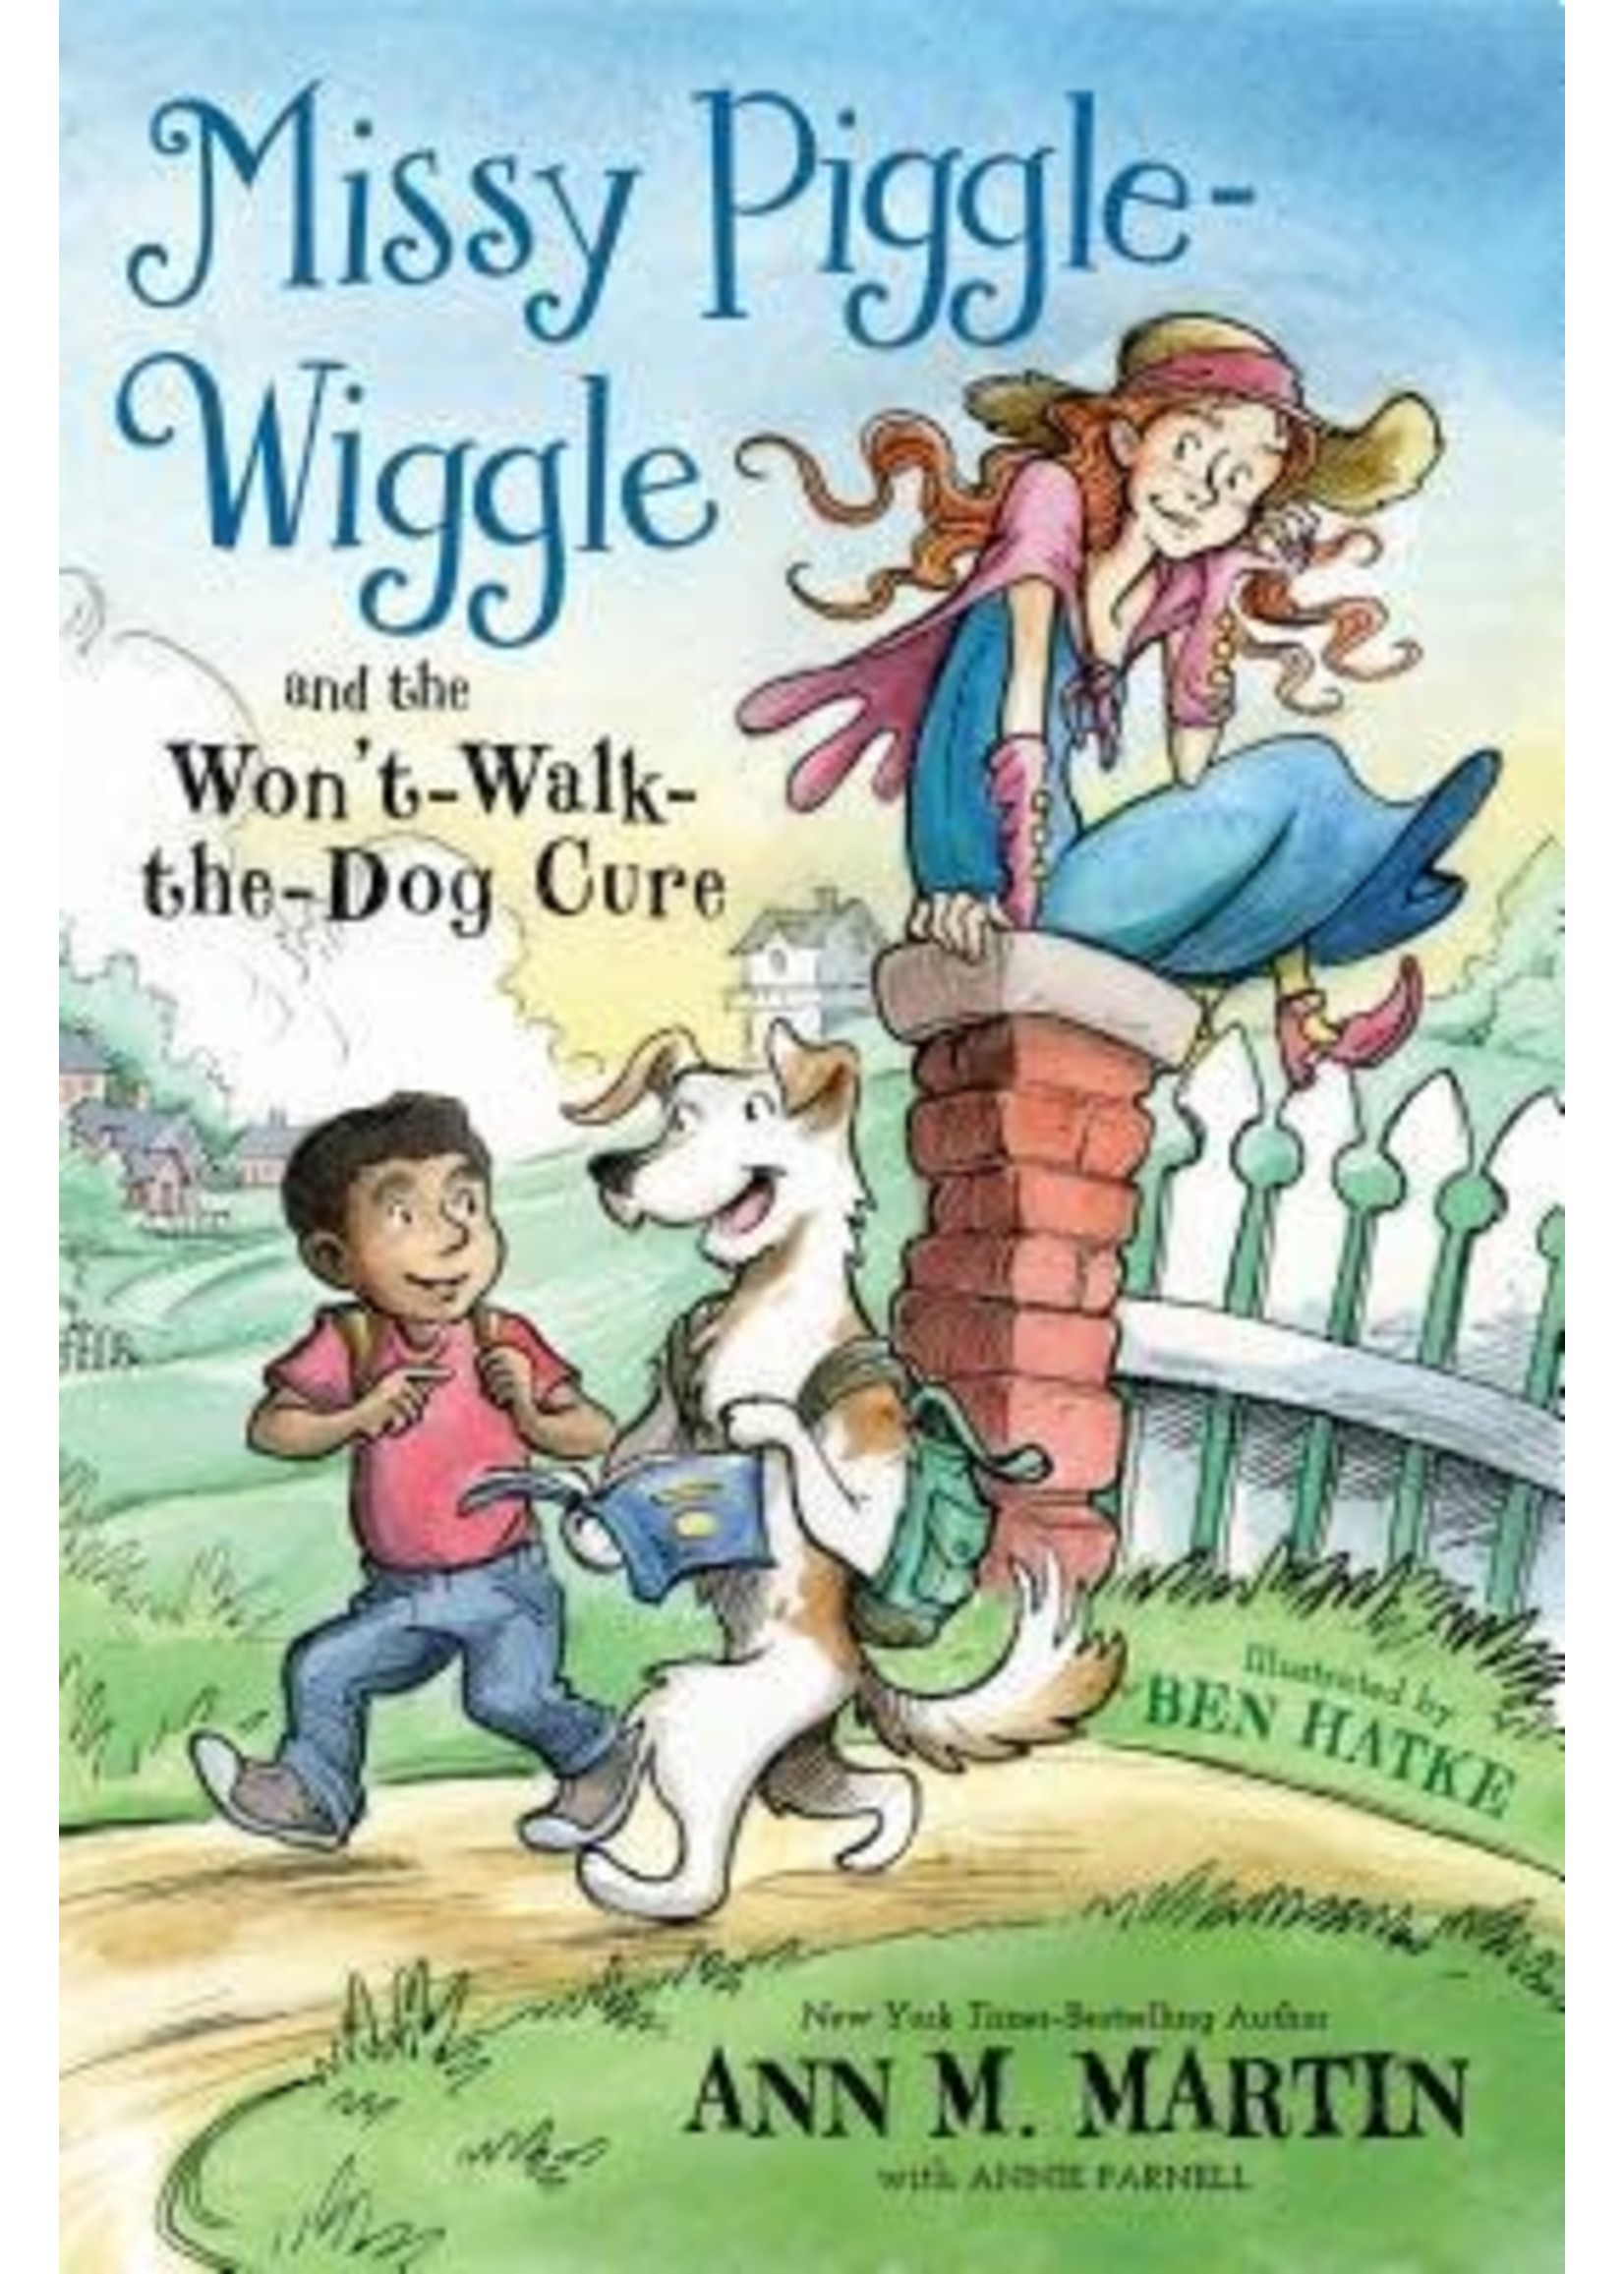 Missy Piggle-Wiggle and the Won't-Walk-The-Dog Cure (Missy Piggle-Wiggle #2) by Ann M. Martin